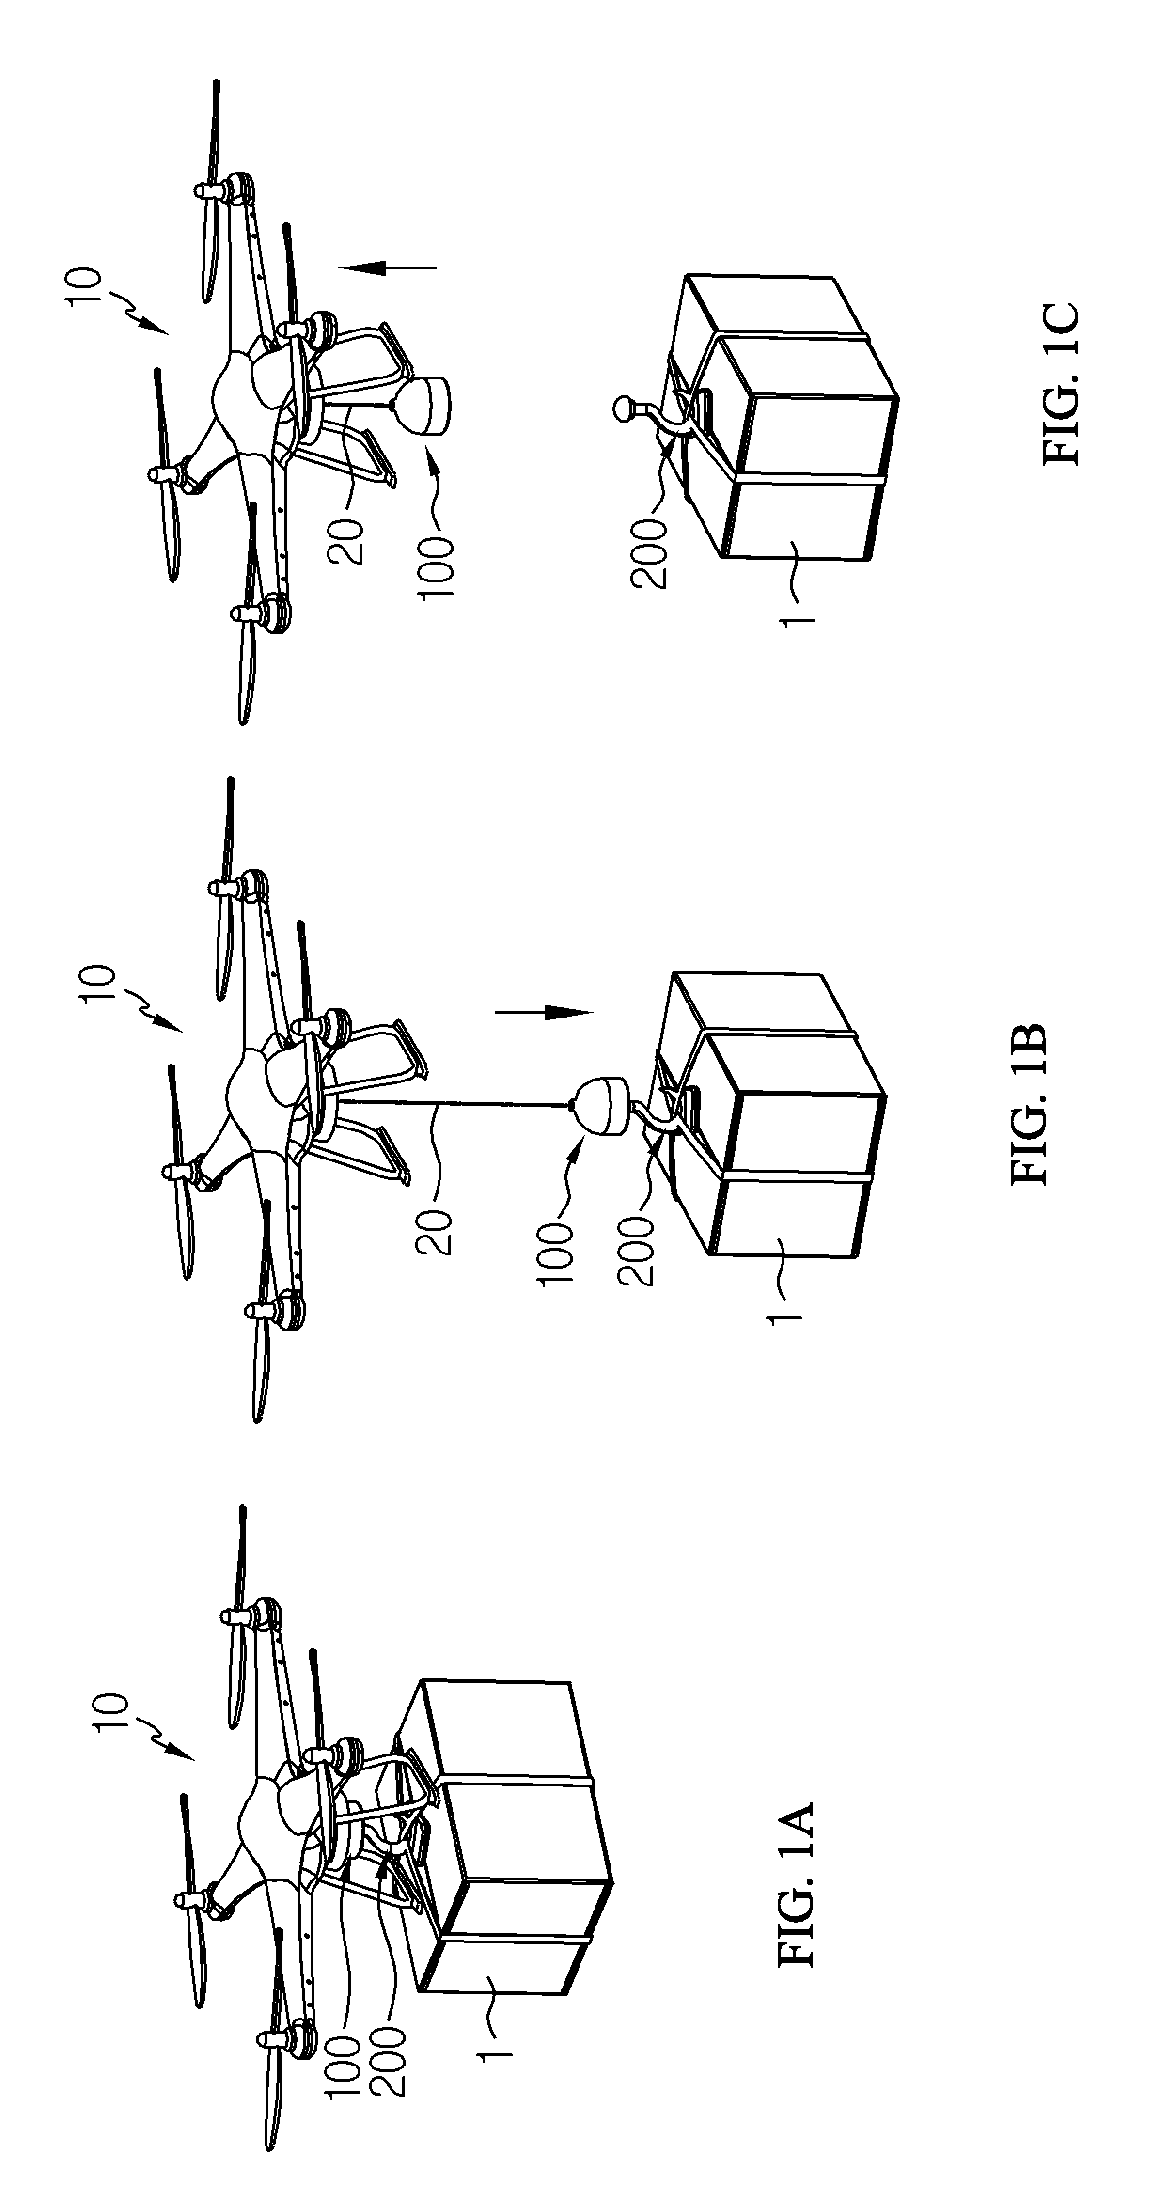 Home-delivered article loading device for drone